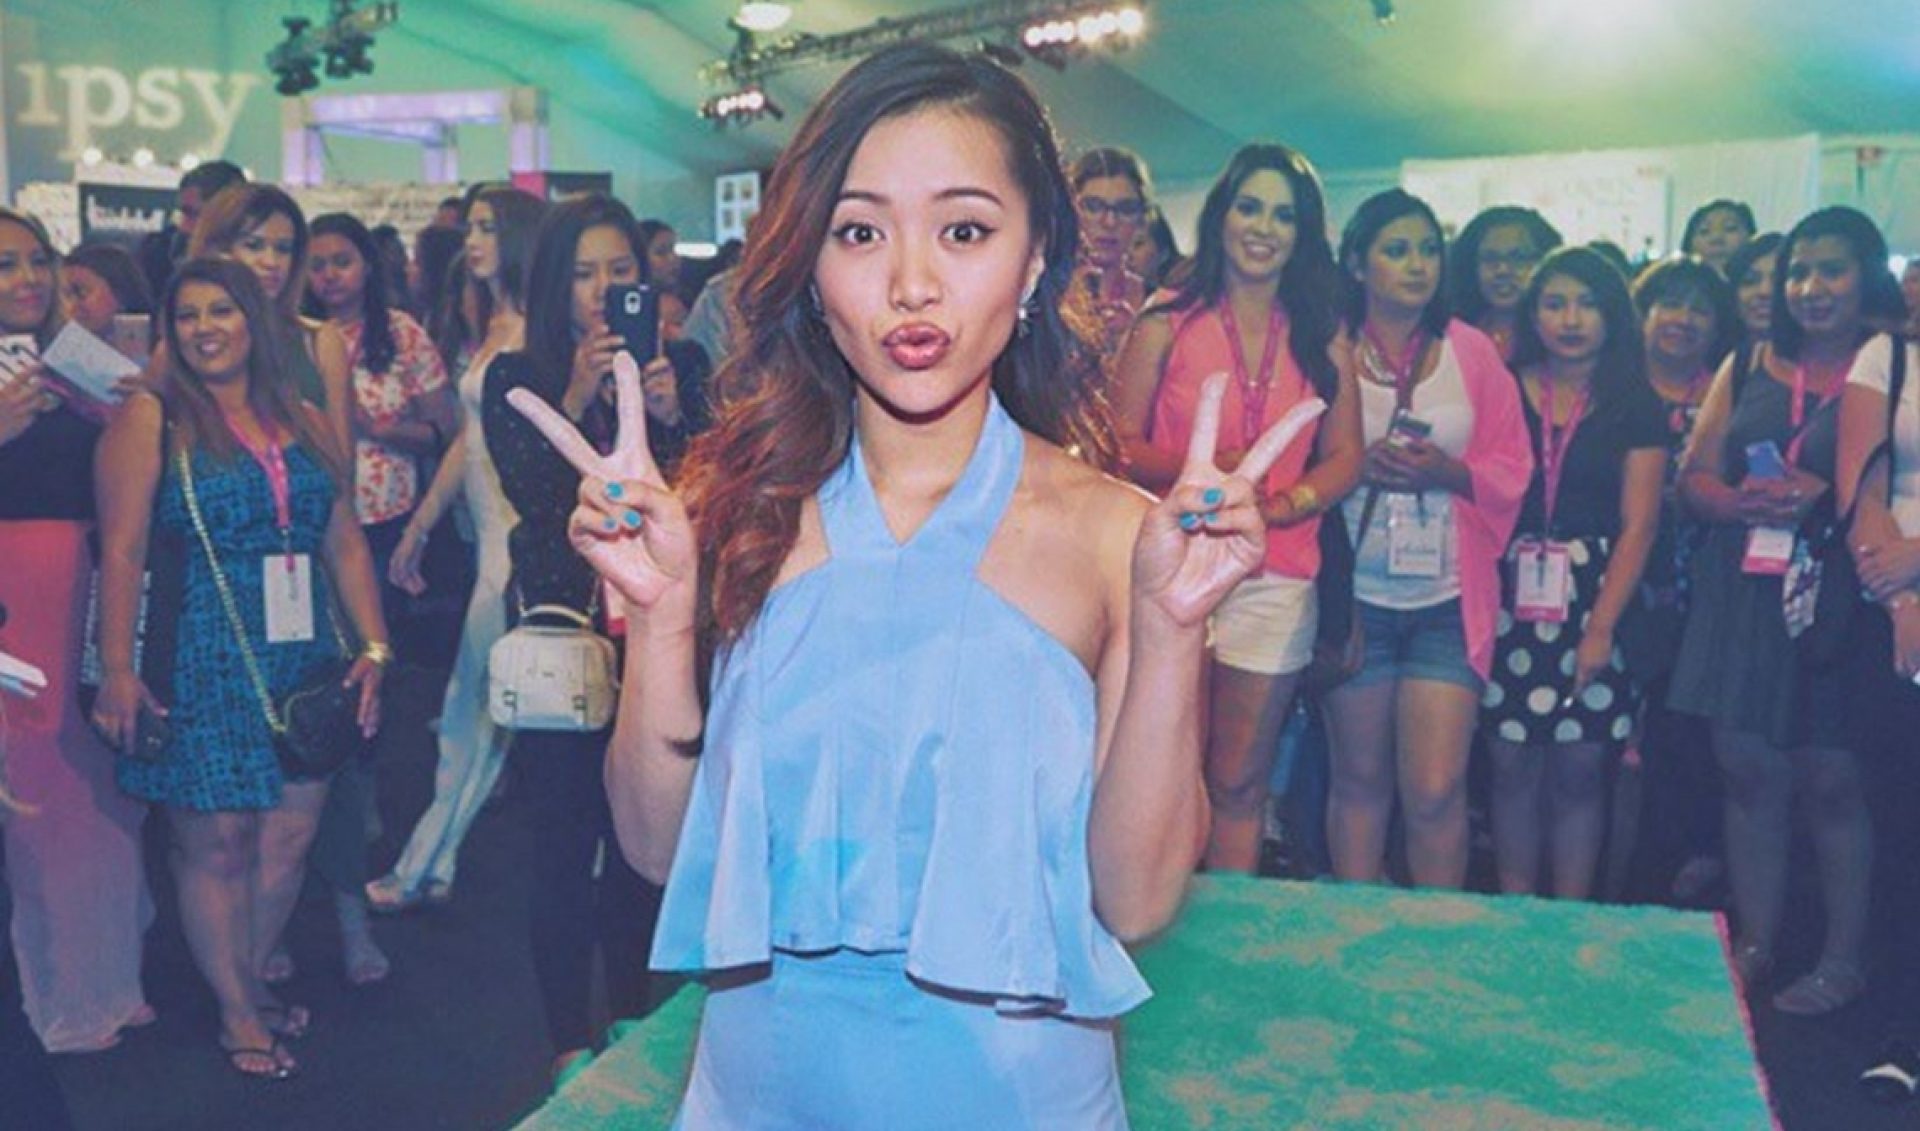 Michelle Phan Raises $105,000 To Fight Child Trafficking For Nonprofit Love146